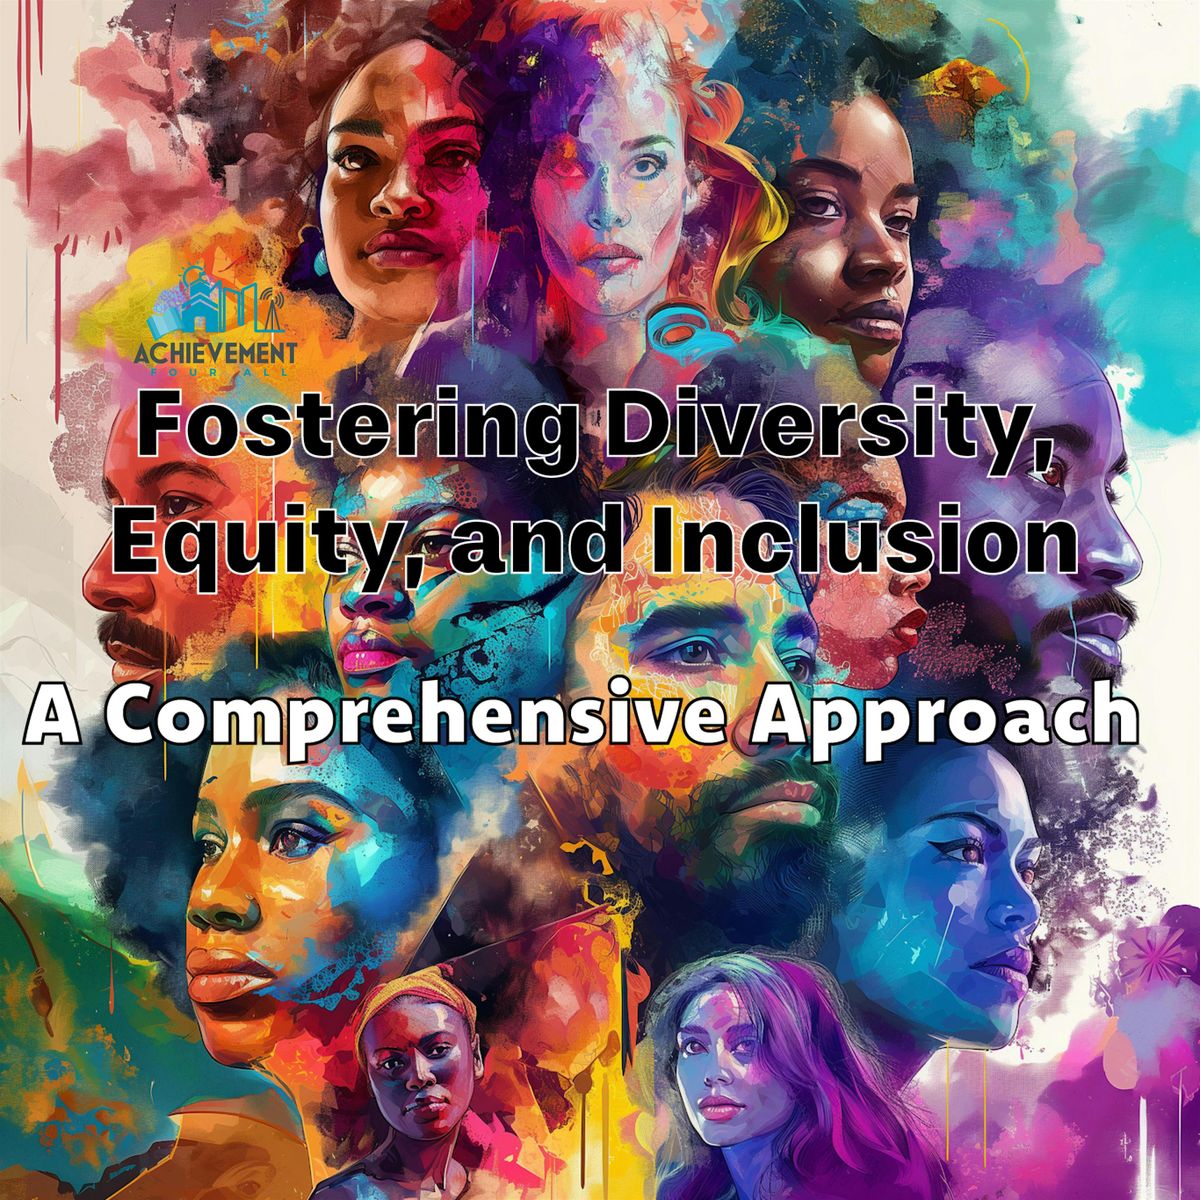 Fostering Diversity, Equity, and Inclusion: A Comprehensive Approach